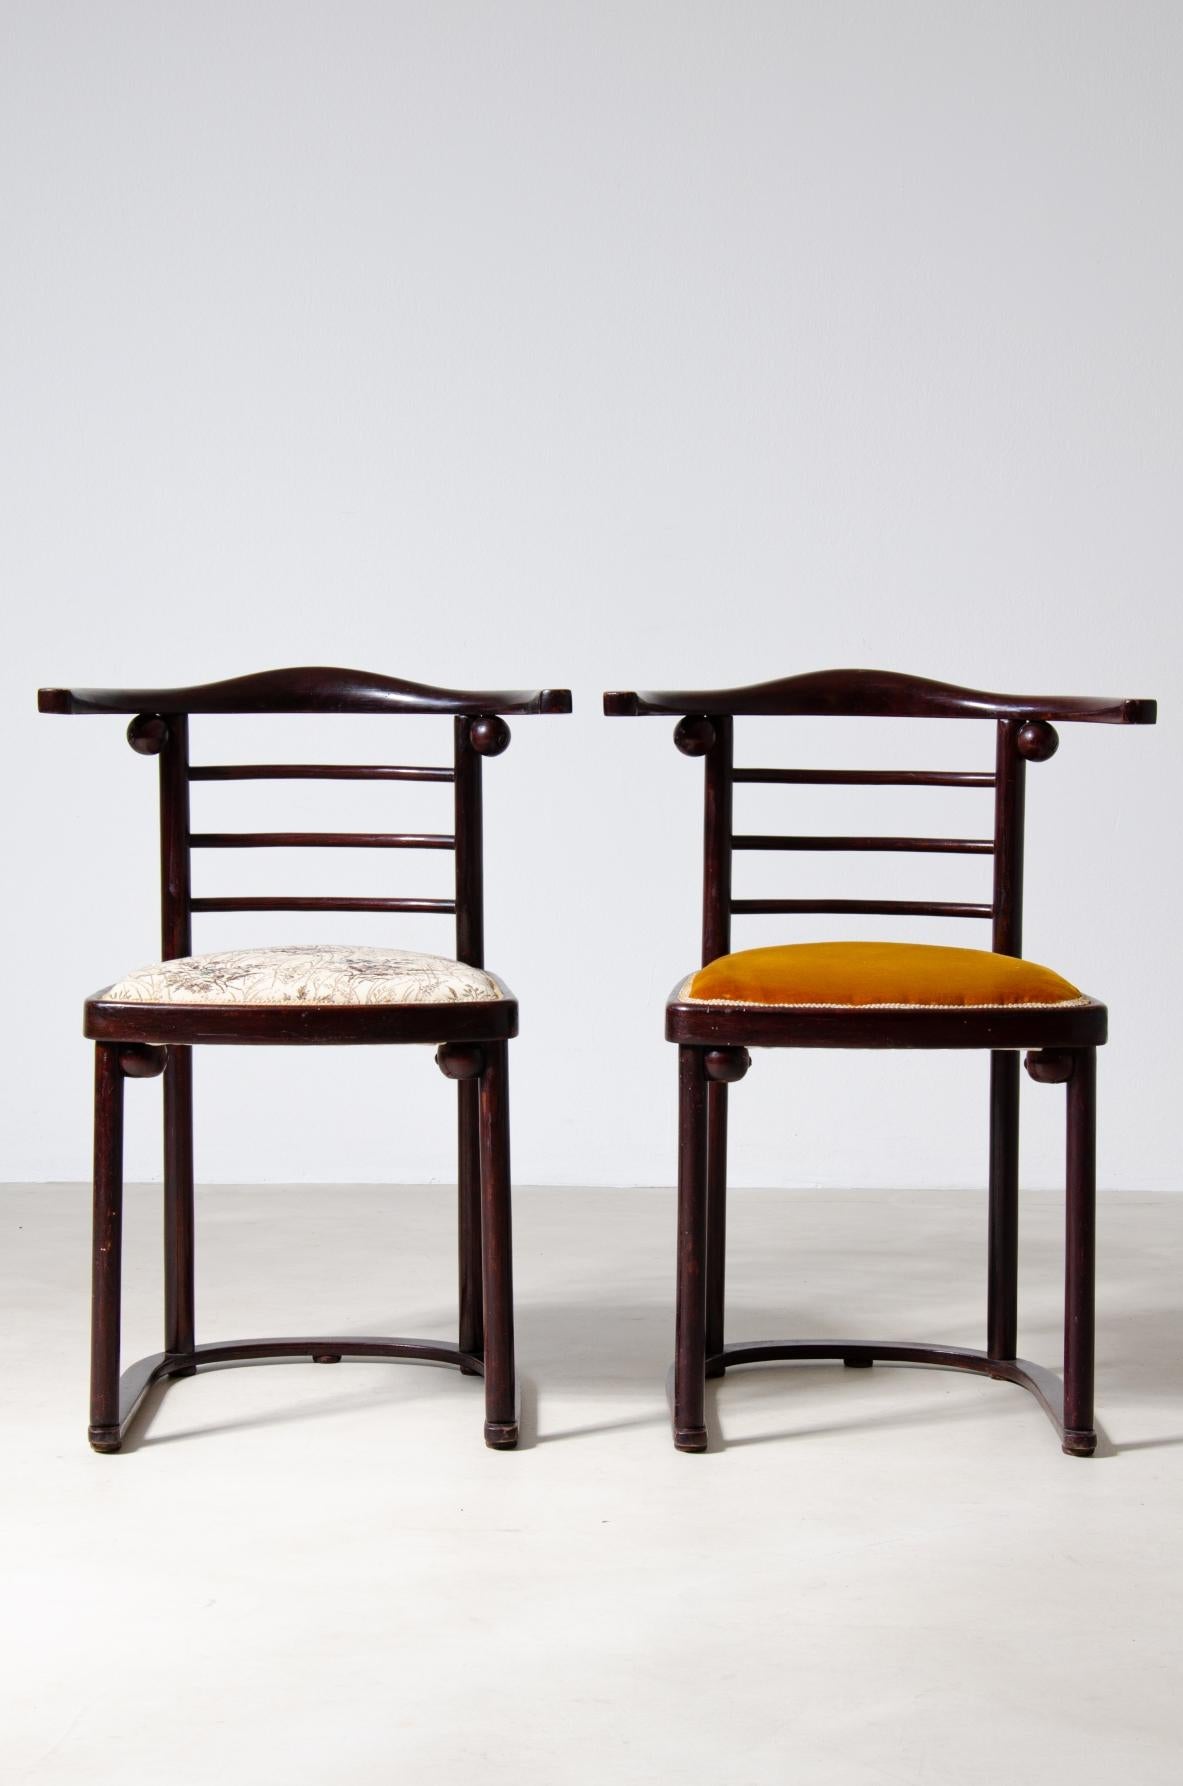 COD-2072
Josef Hoffmann (1870-1956)

Rare set of four chairs in curved polished wood and upholstered seat.

Manufactured by JJ.Kohn, Vienna, 1907.

42x42xh46/75